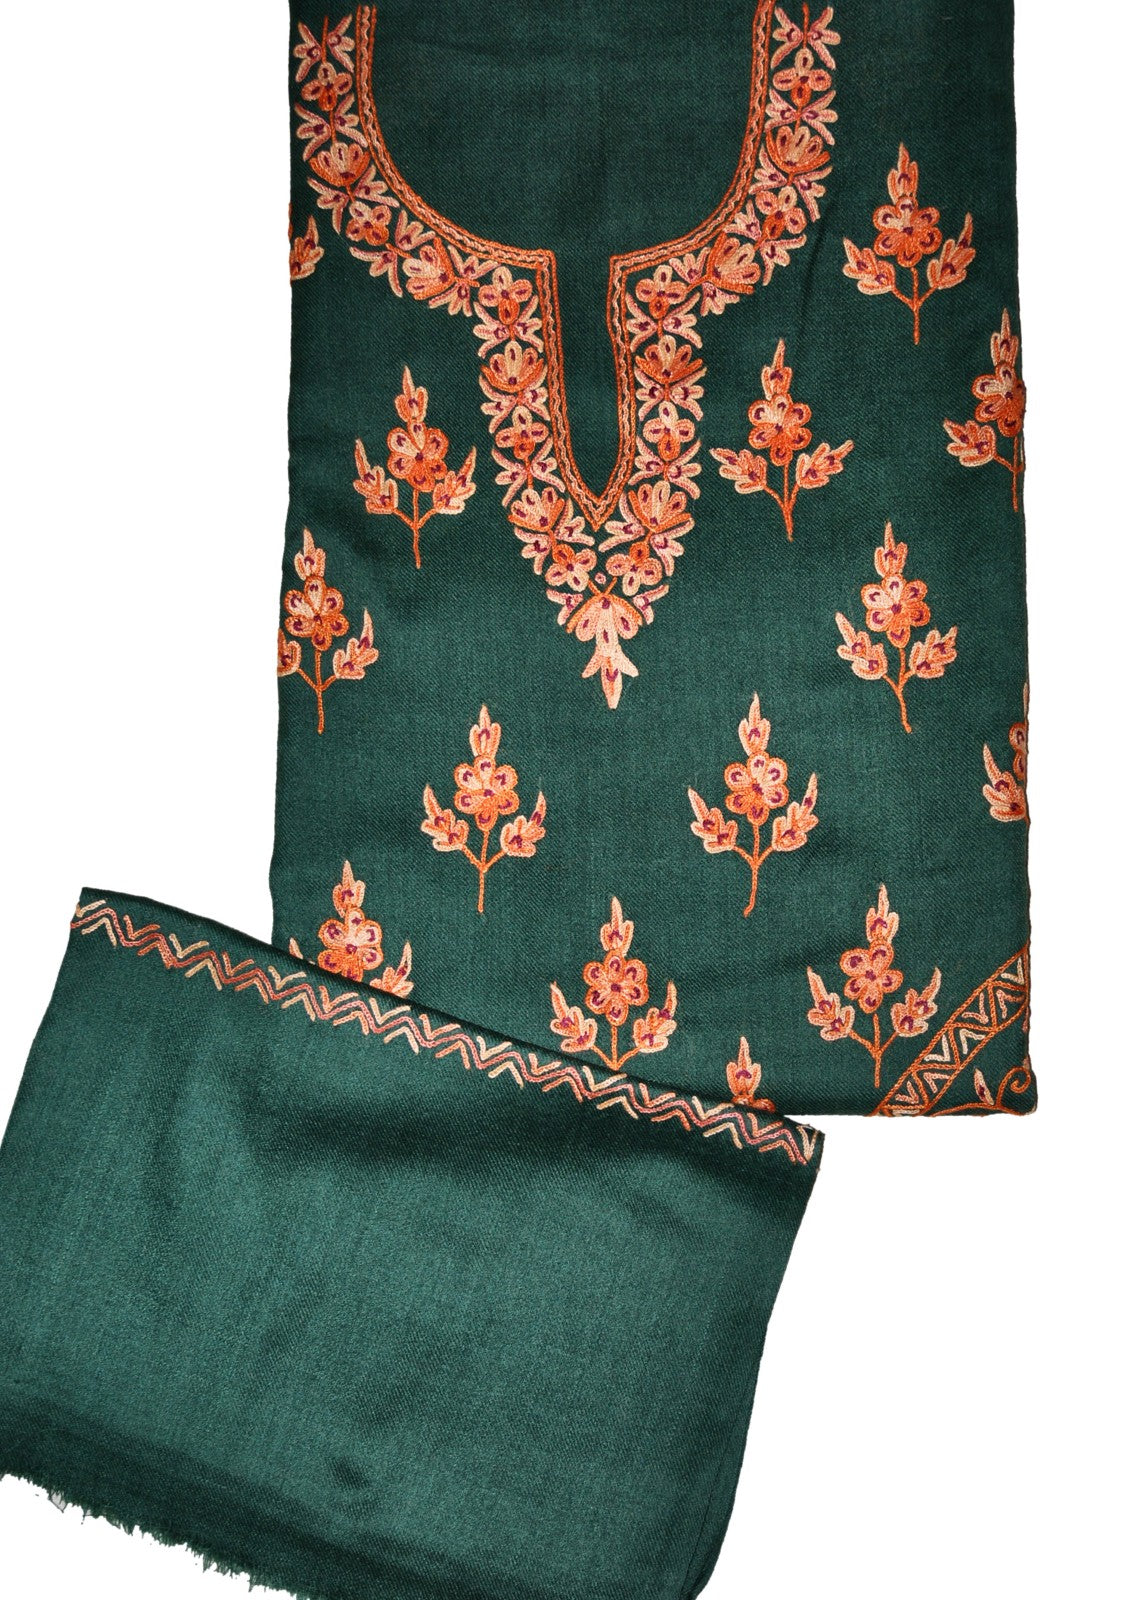 Woolen Salwar Kameez Suit Unstitched Fabric and Shawl Green, Rust Embroidery #FS-472